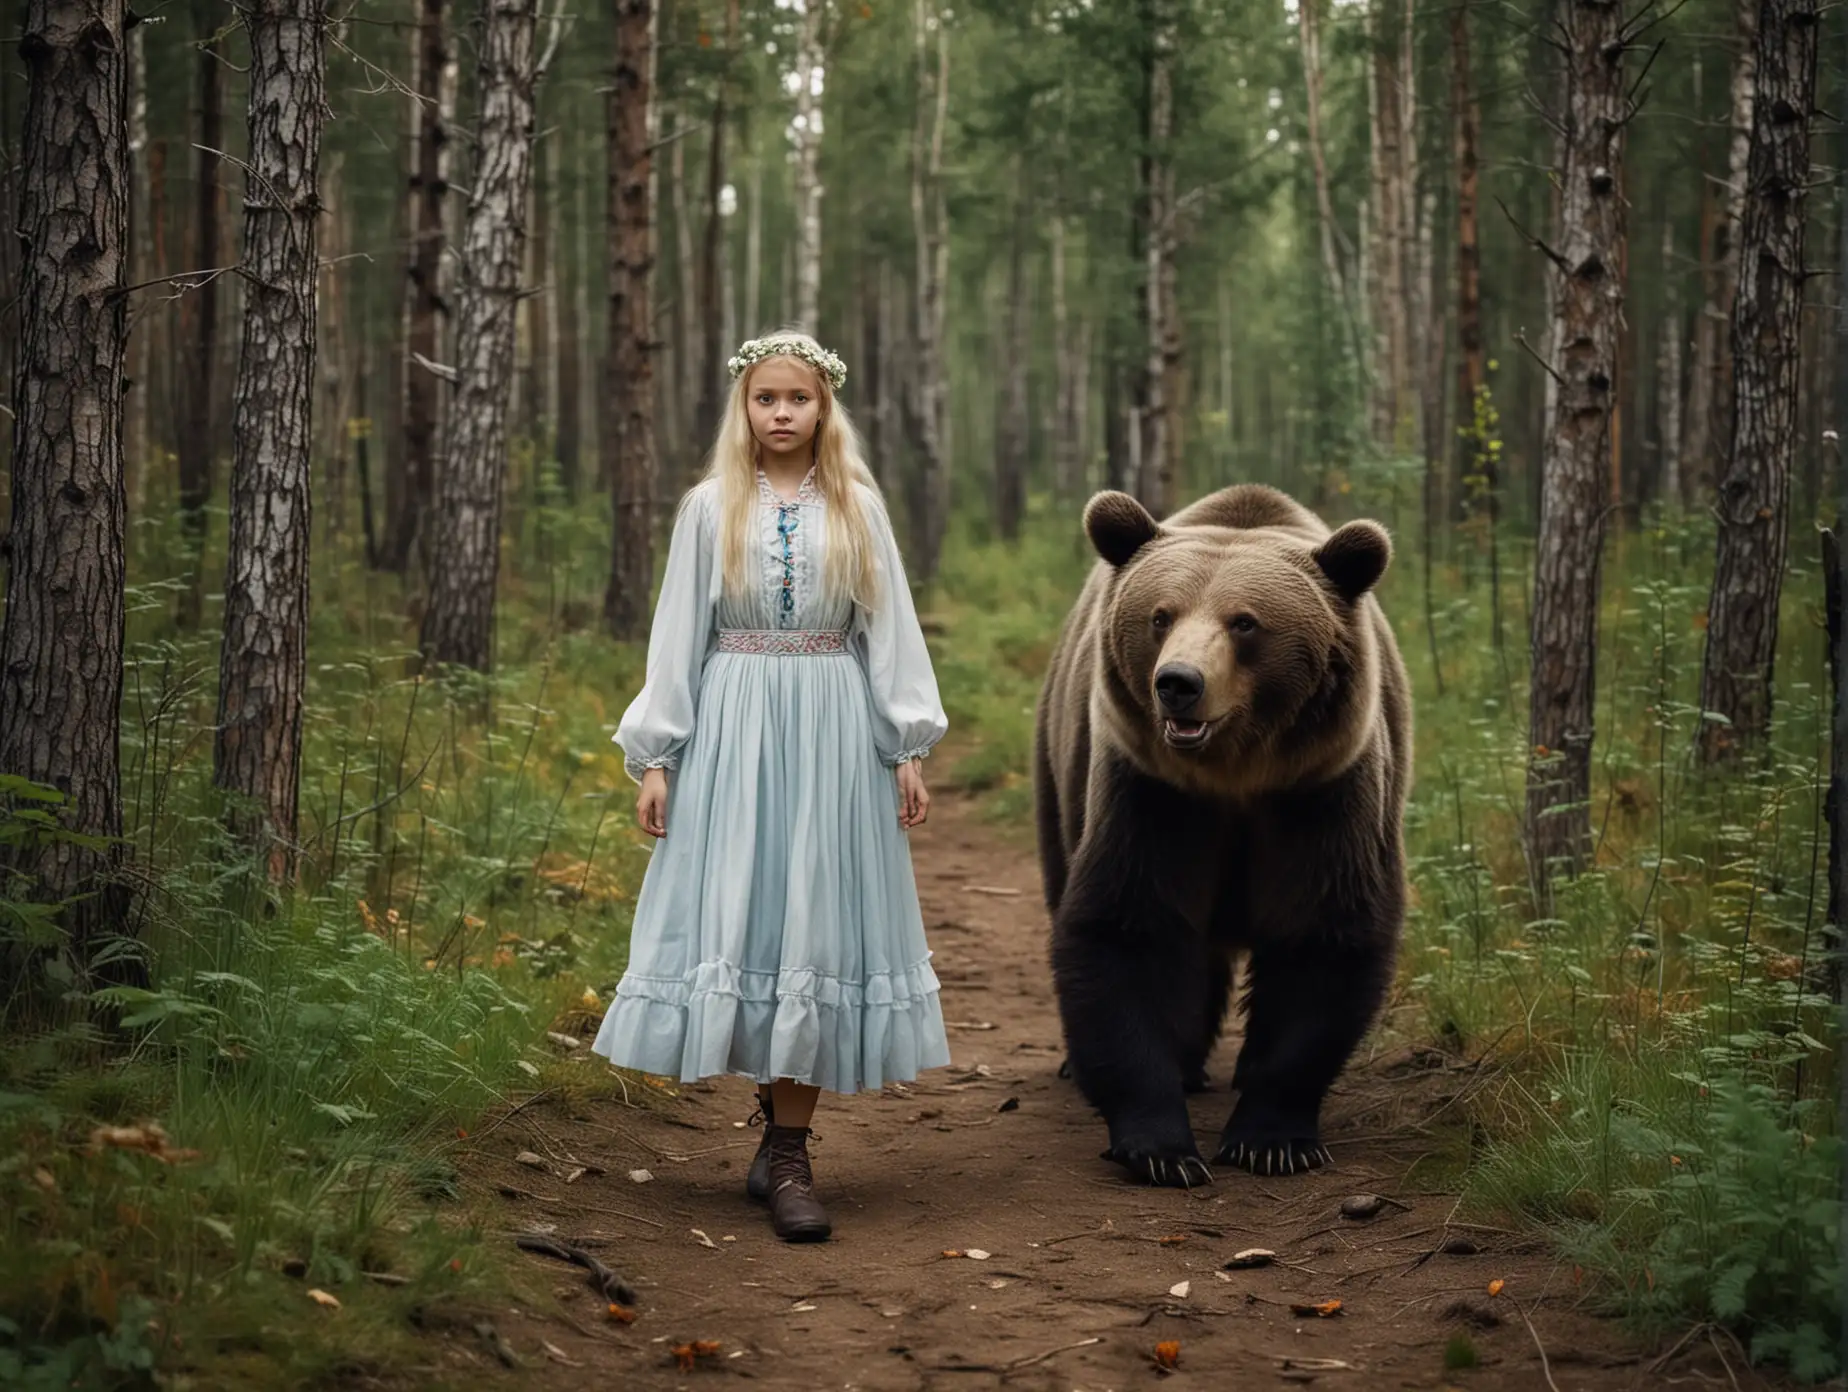 Russian-Girl-Walking-in-the-Forest-with-a-Bear